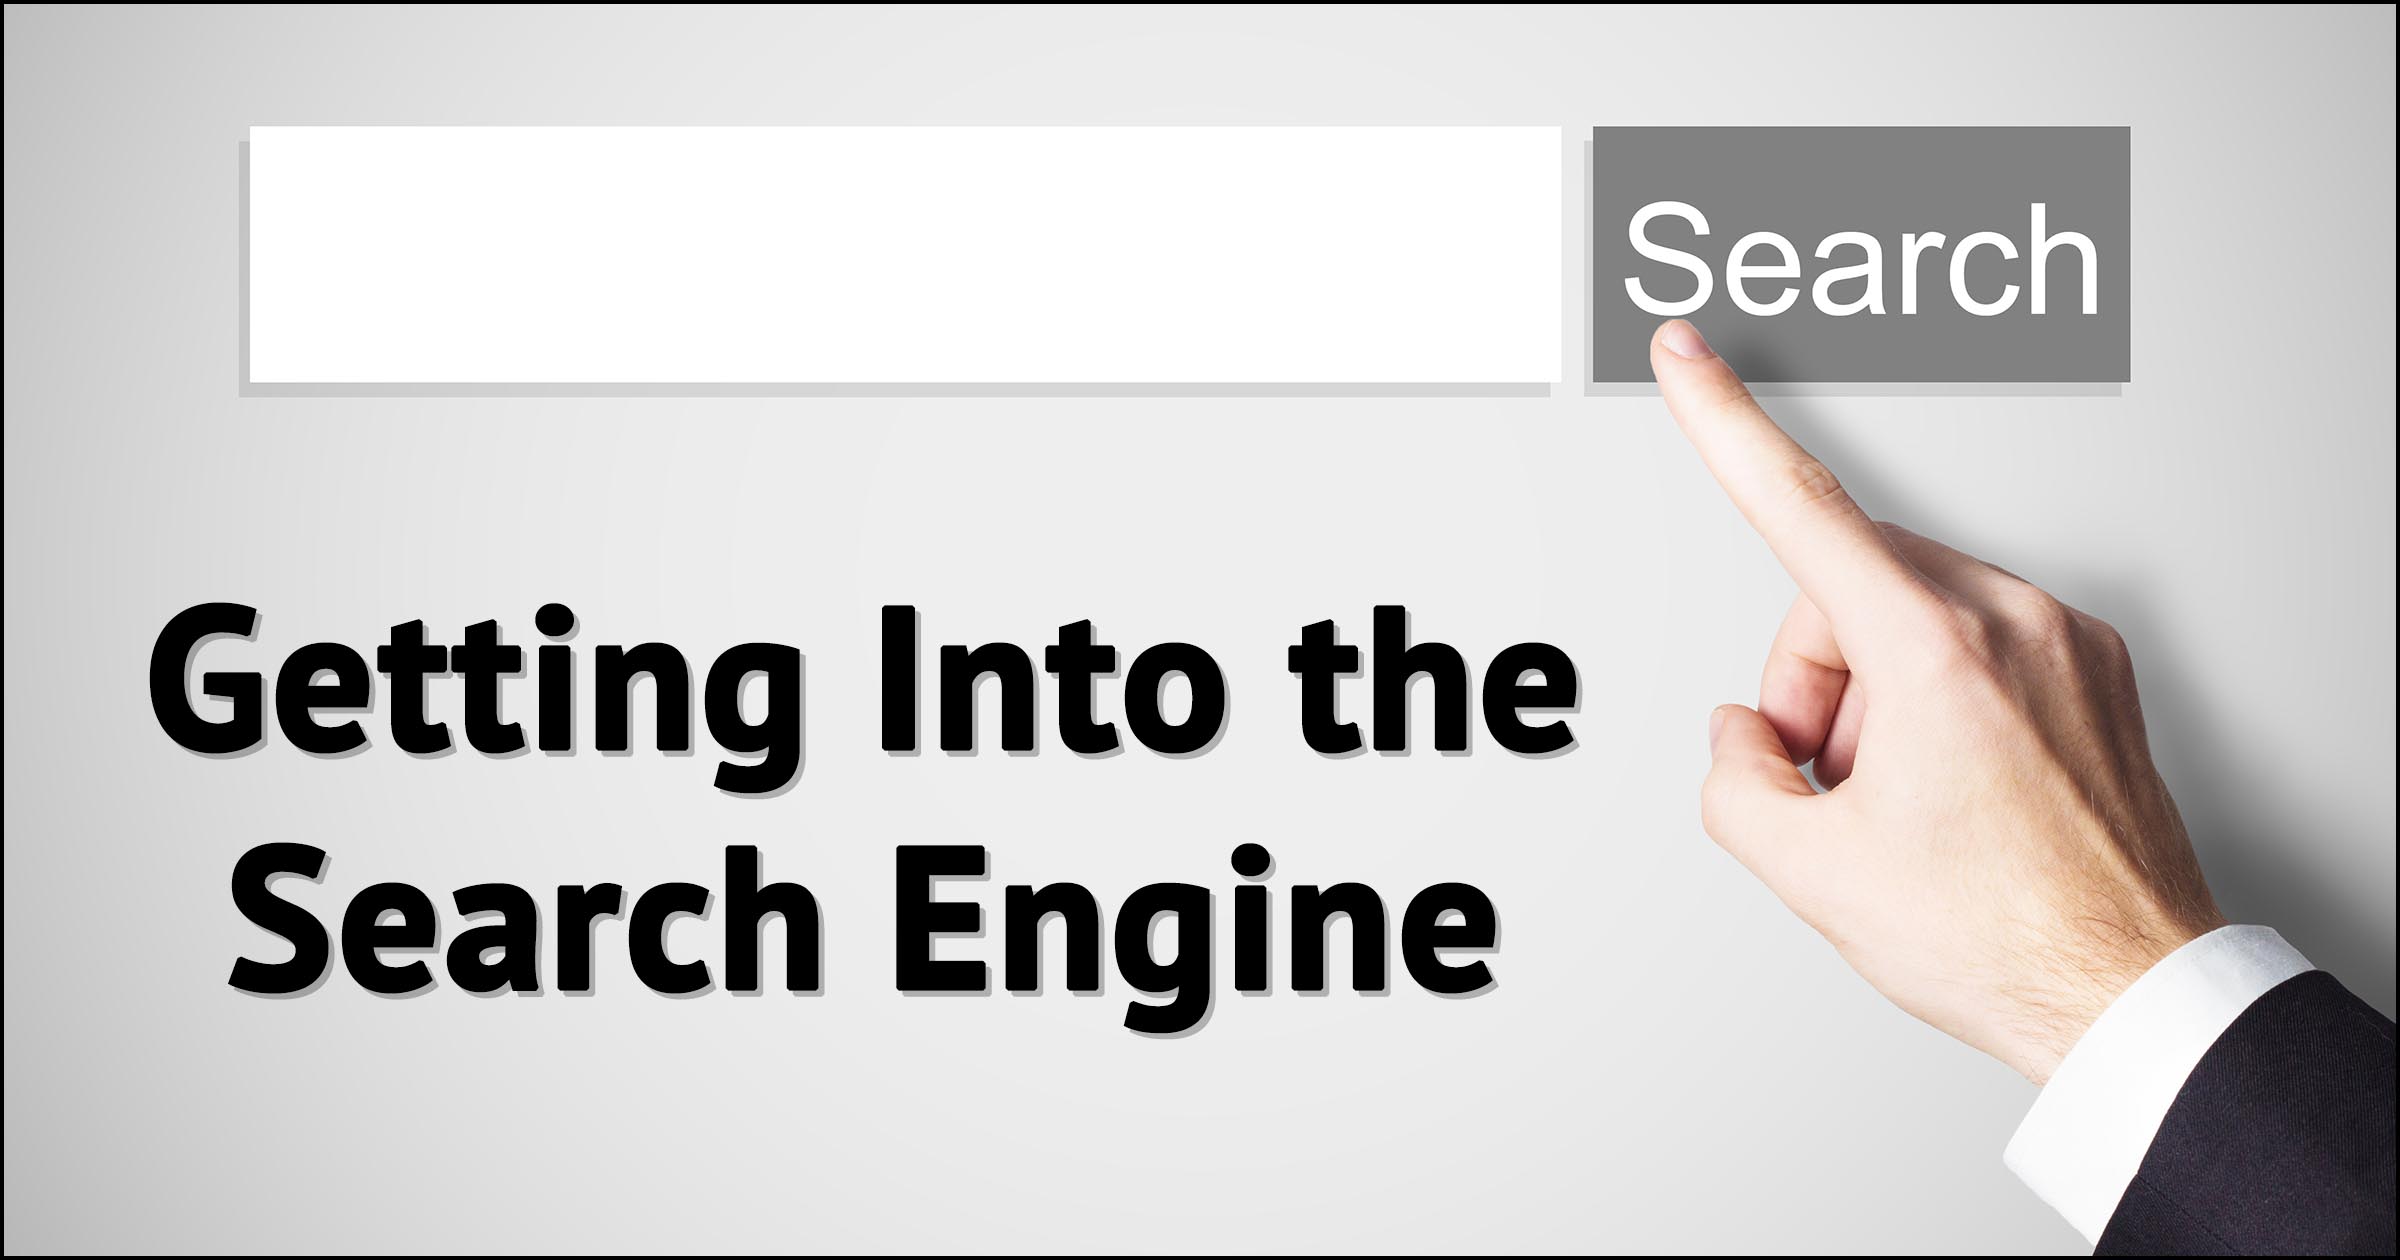 Getting Into the Search Engine